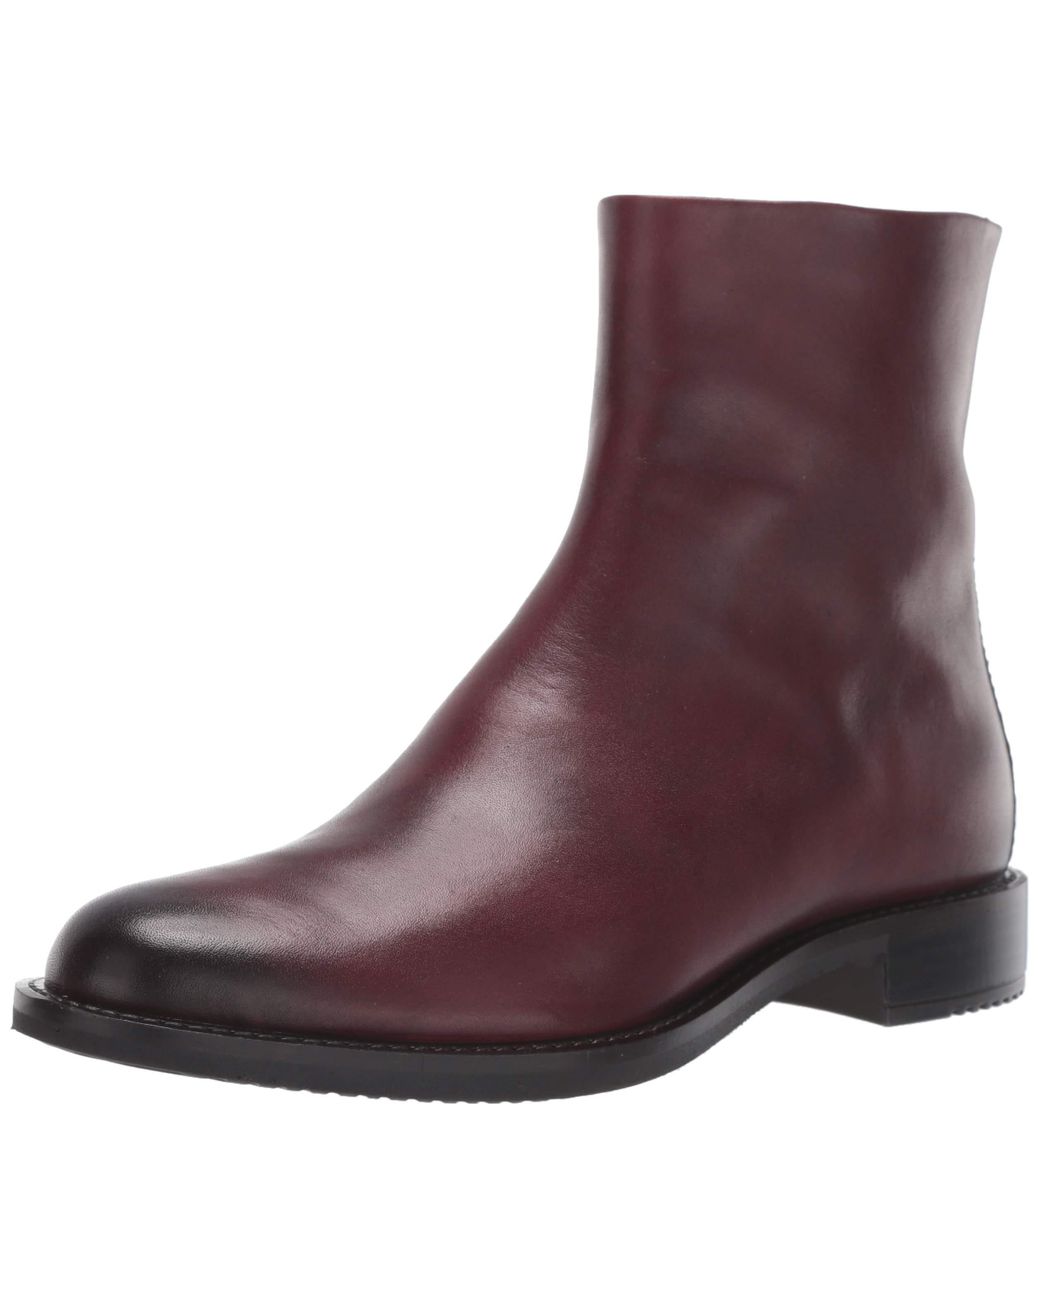 Ecco Leather Sartorelle 25 Ankle Boot - Save 51% - Lyst